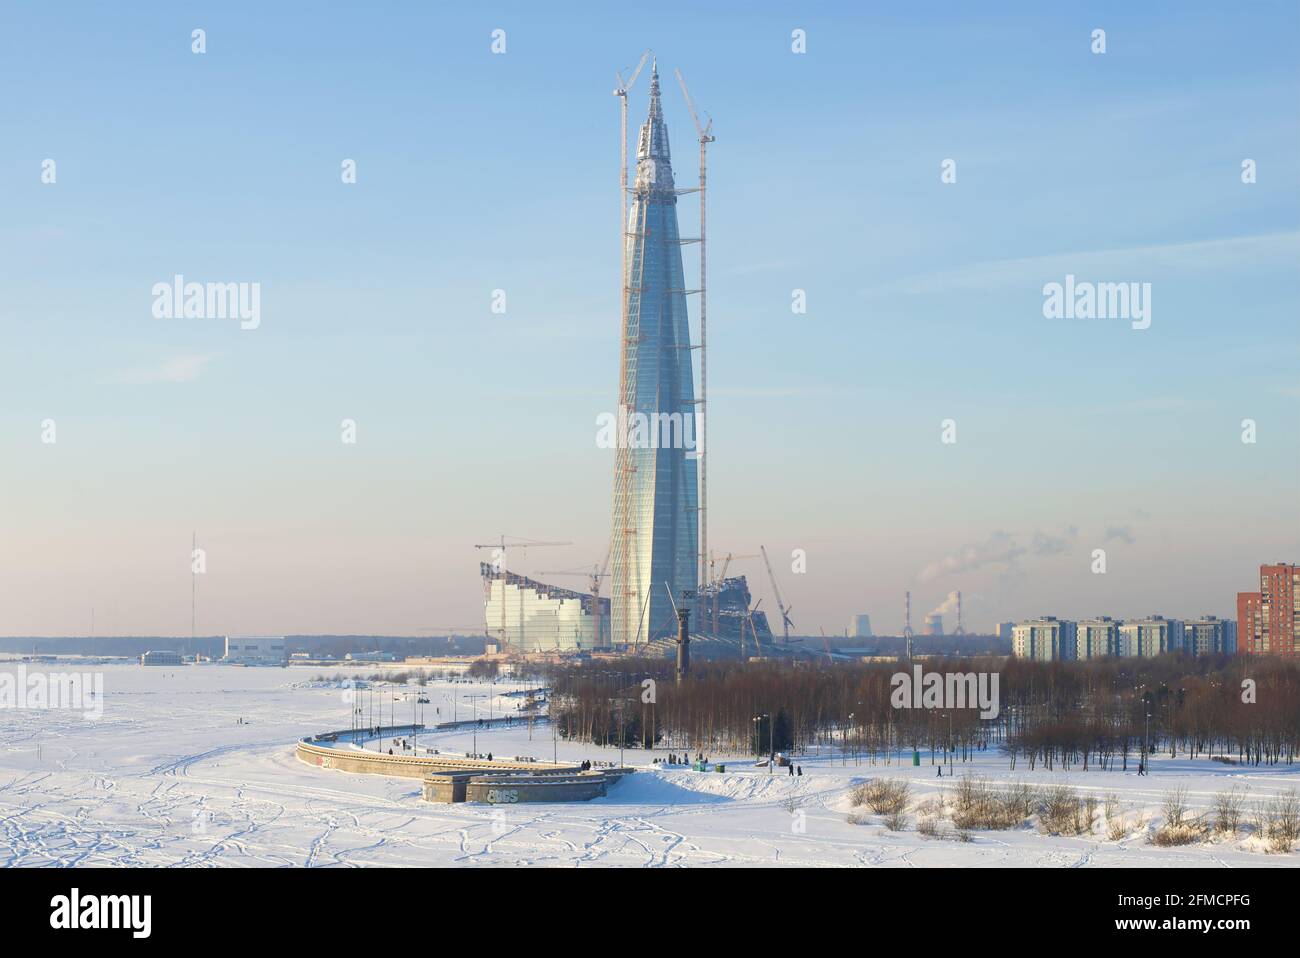 ST PETERSBURG, RUSSIA - FEBRUARY 08, 2018: View of the construction of the Lakhta Center skyscraper. The northernmost and tallest skyscraper in Europe Stock Photo